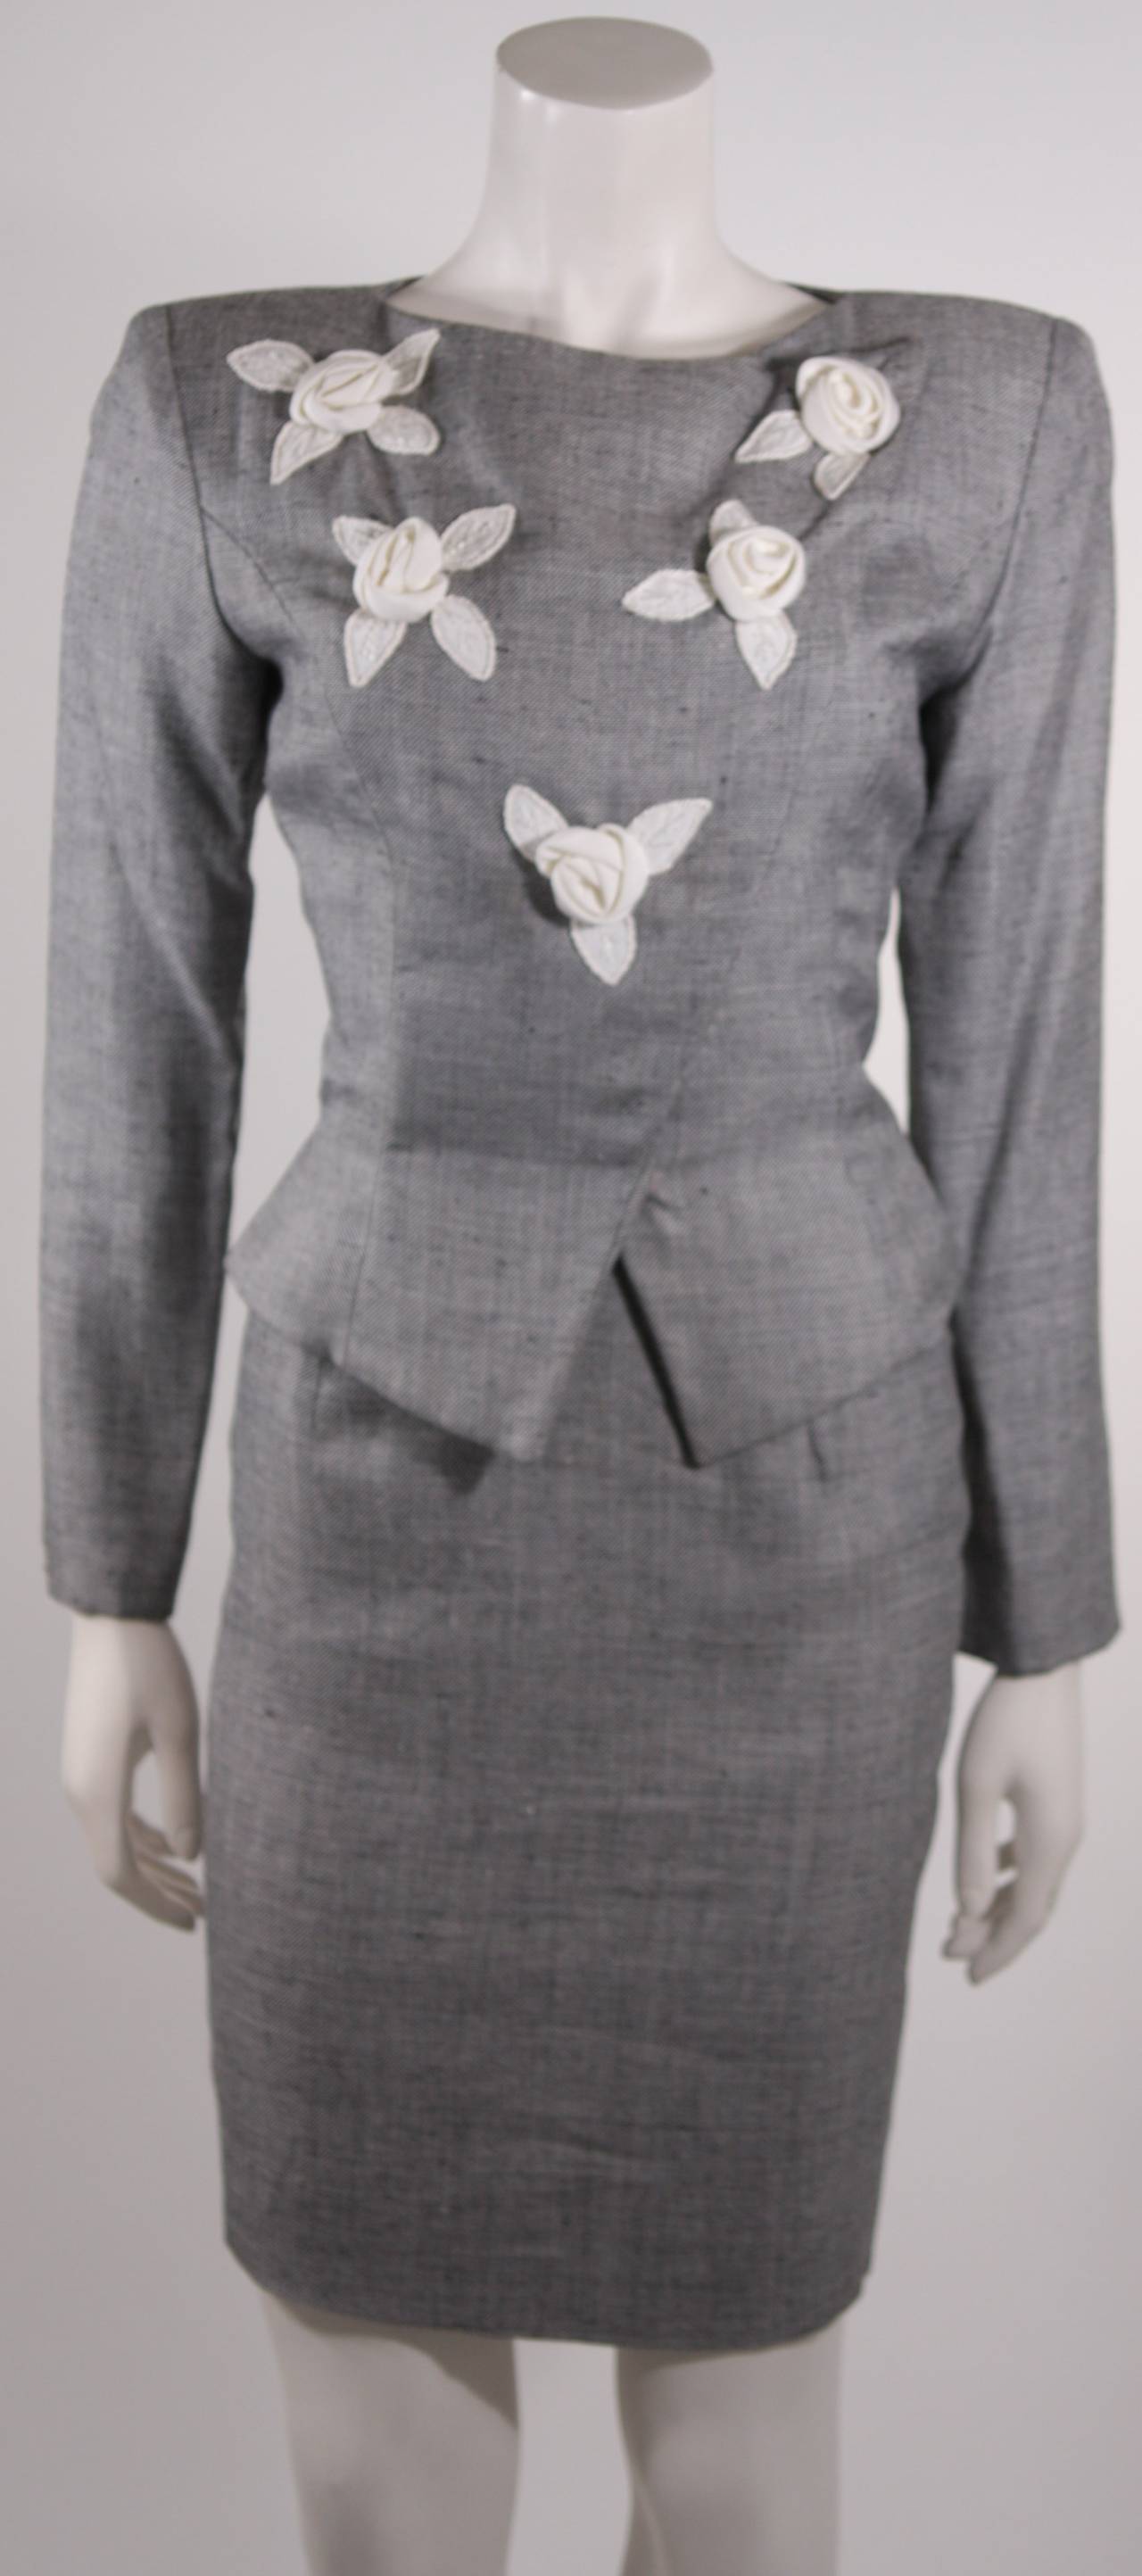 This is a phenomenal Vicky Tiel design. This skirt suit is composed of a fantastic wool and linen blend a fabulous shade of pale grey. The jacket is adorned in white flowers with an asymmetrical snap fastening. The skirt has a pencil silhouette with